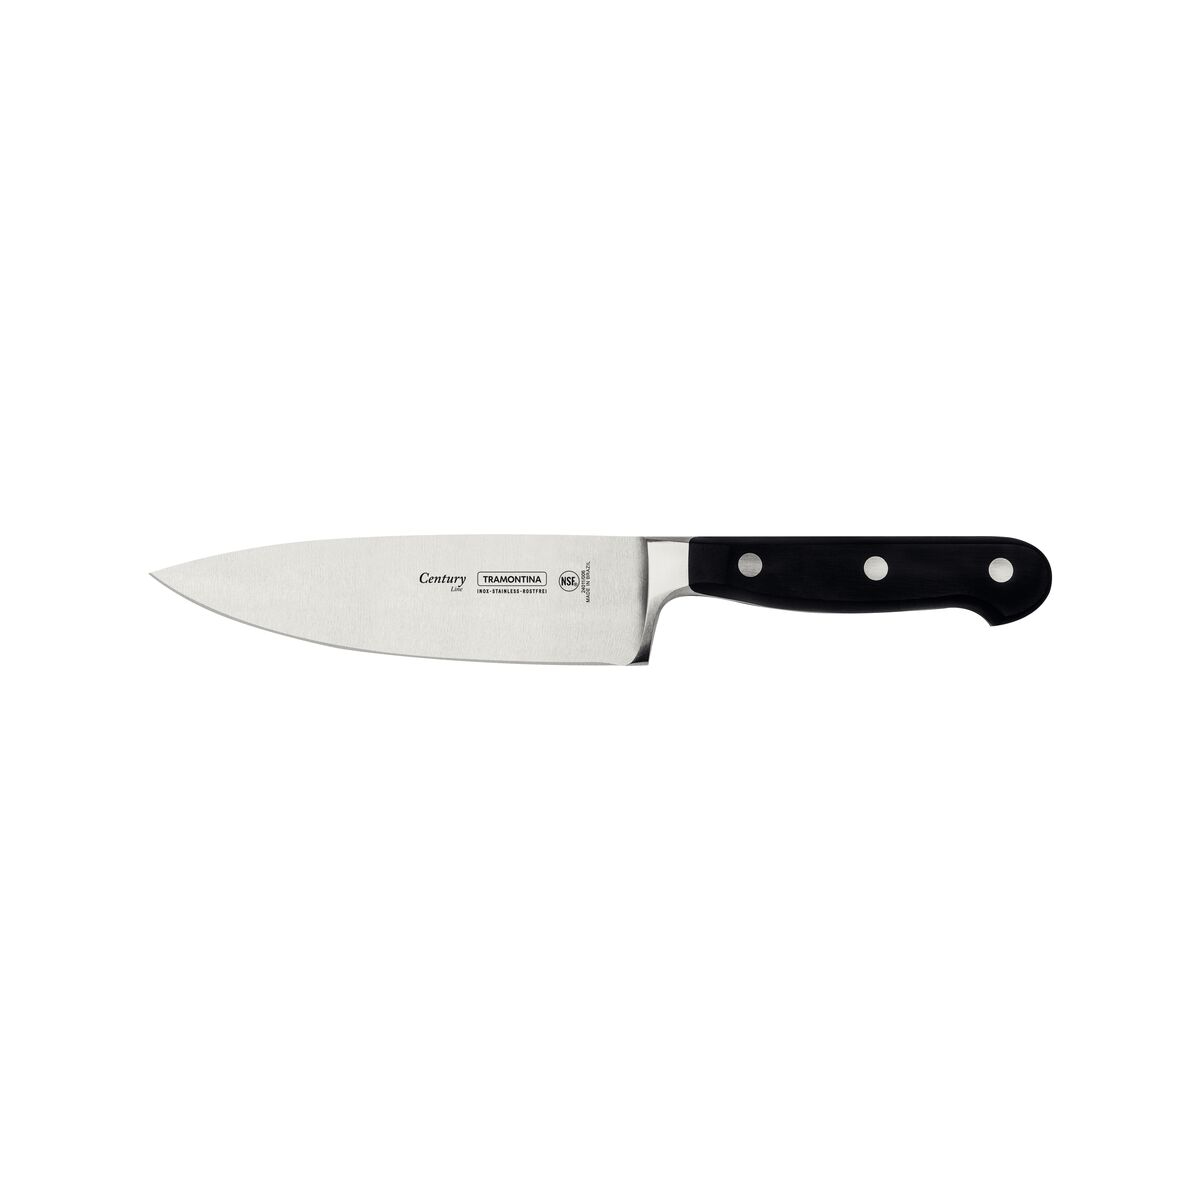 6" Chef's knife